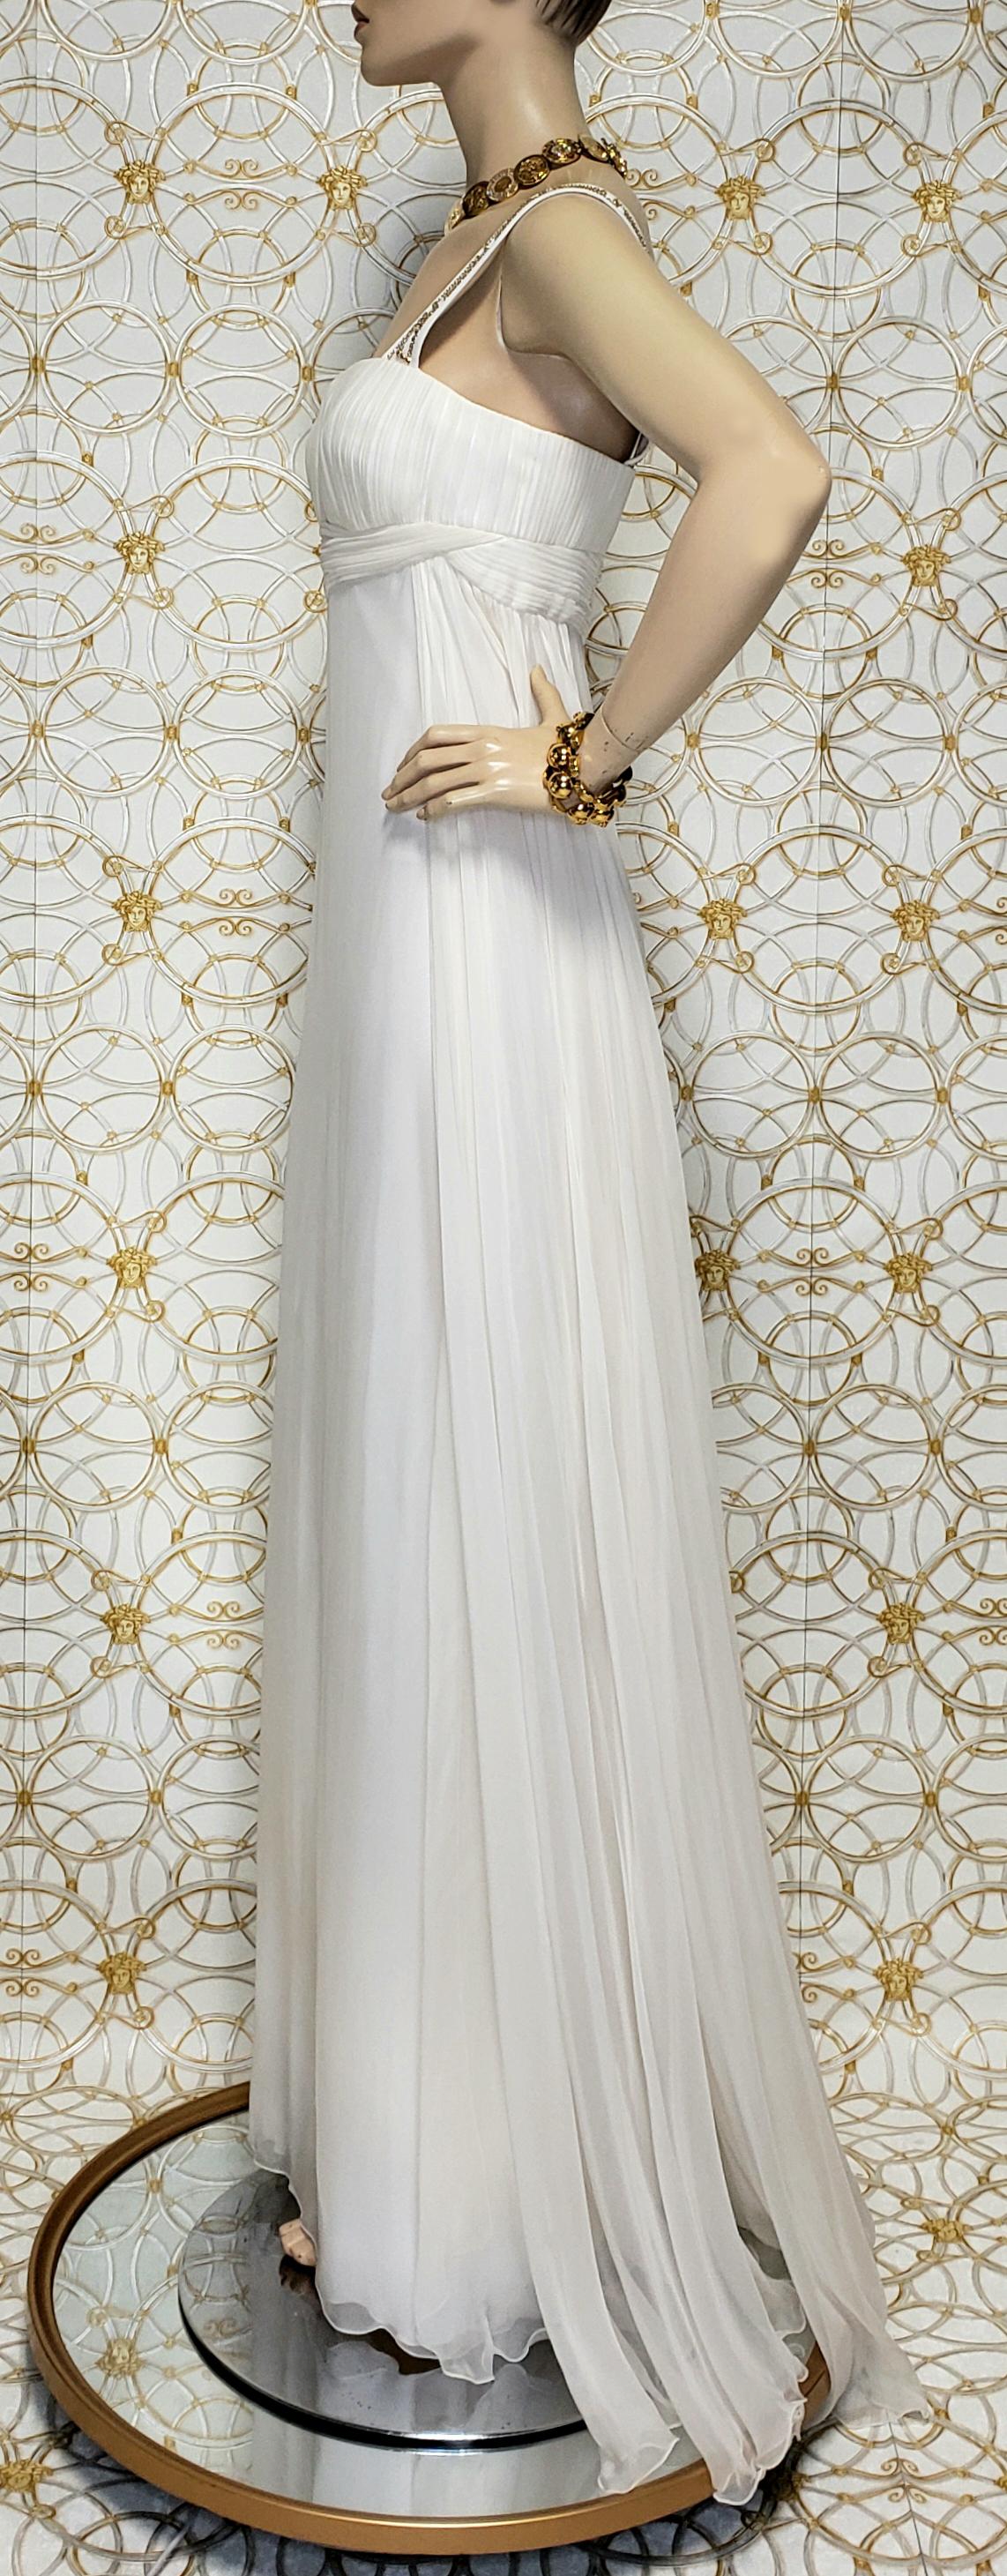 New Versace Crystal Embellished White Silk Gown 44 - 8 For Sale 1